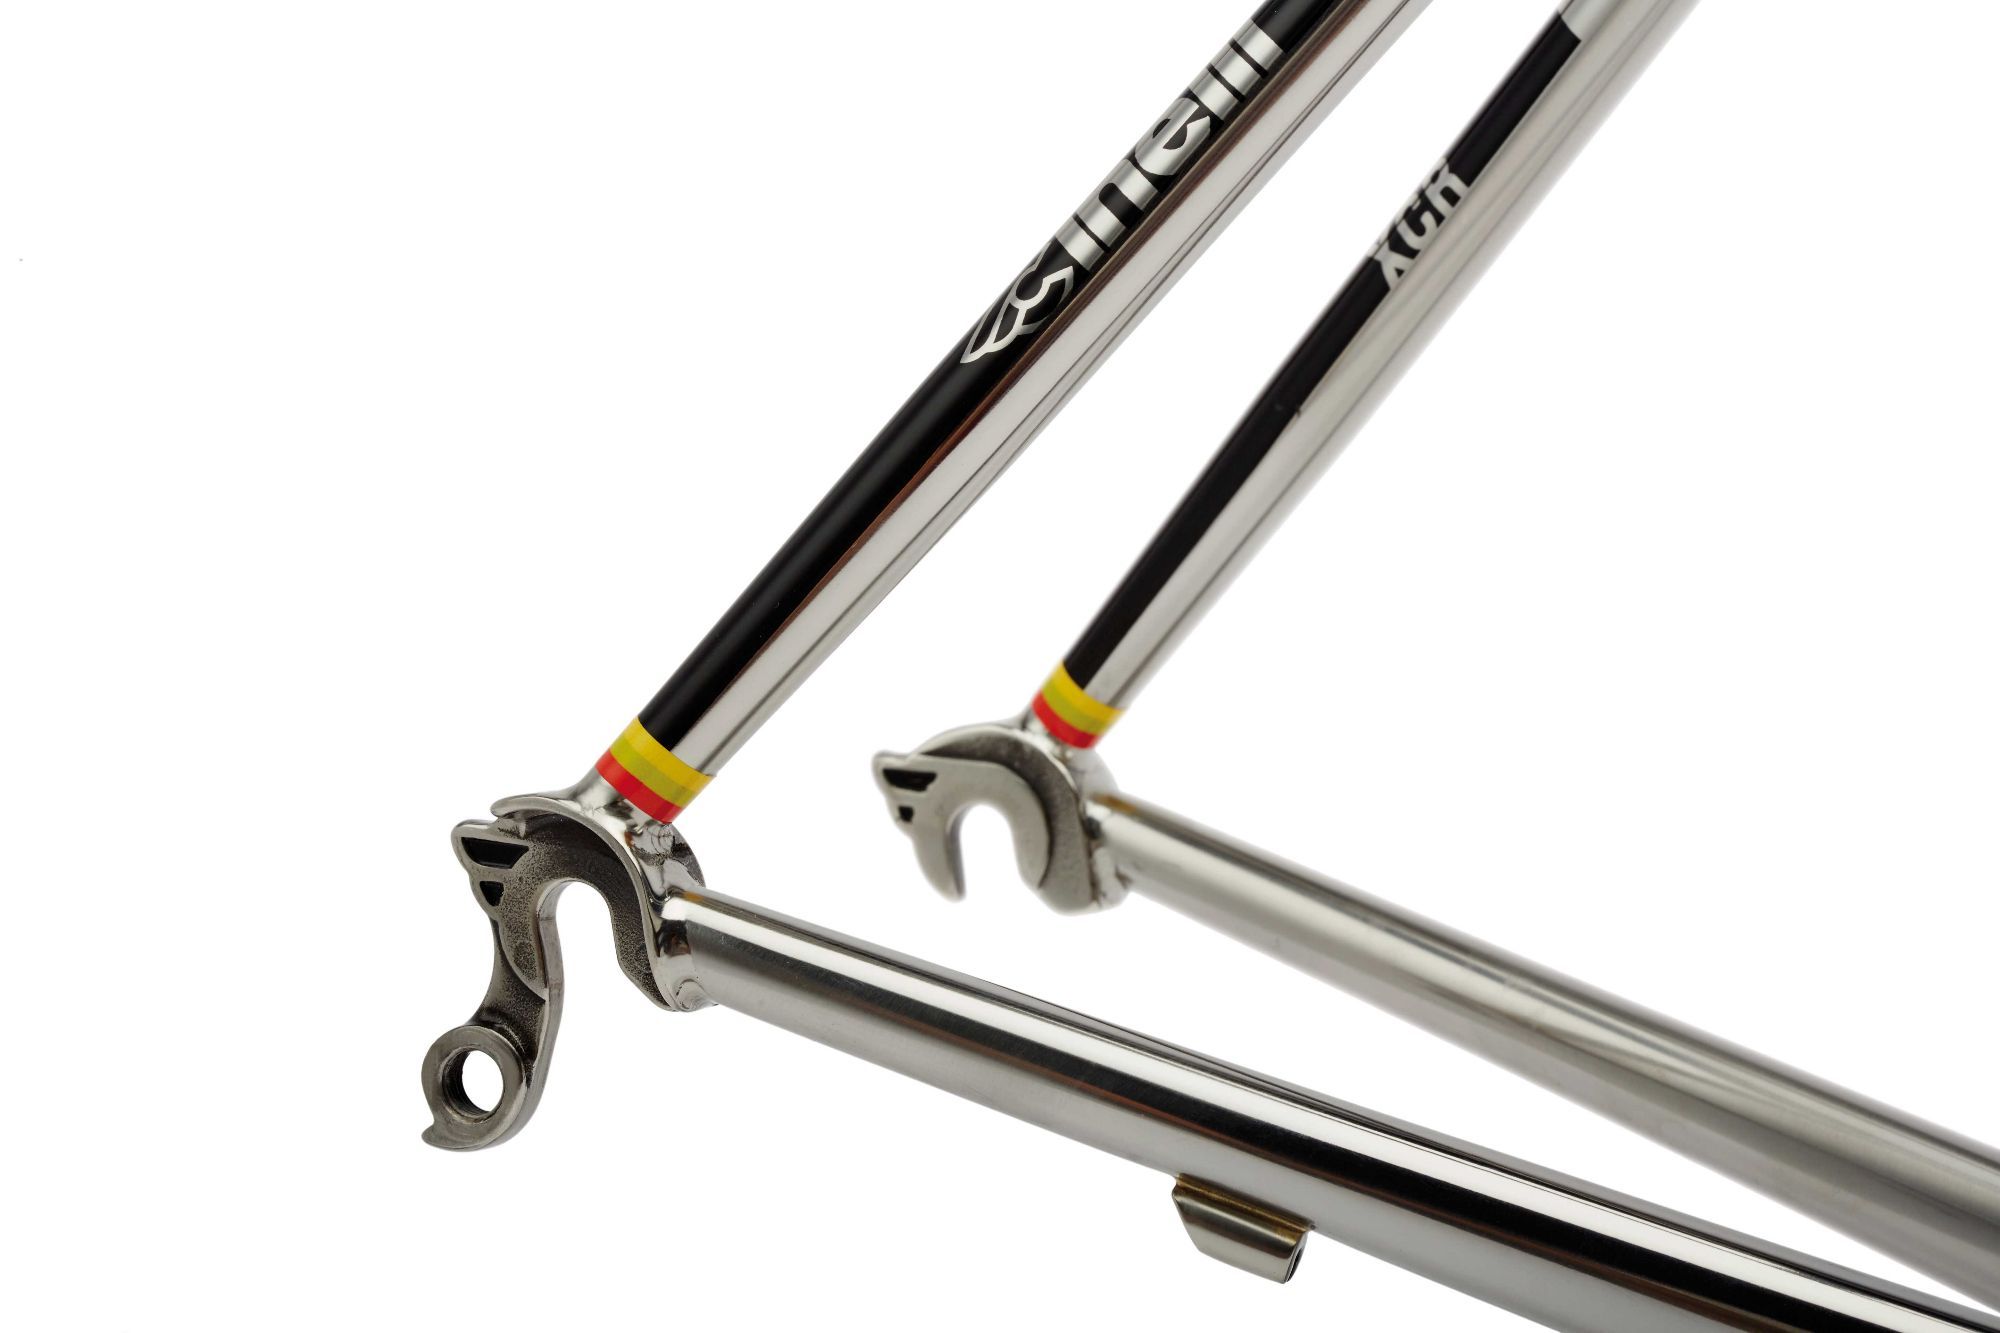 cinelli stainless steel frame